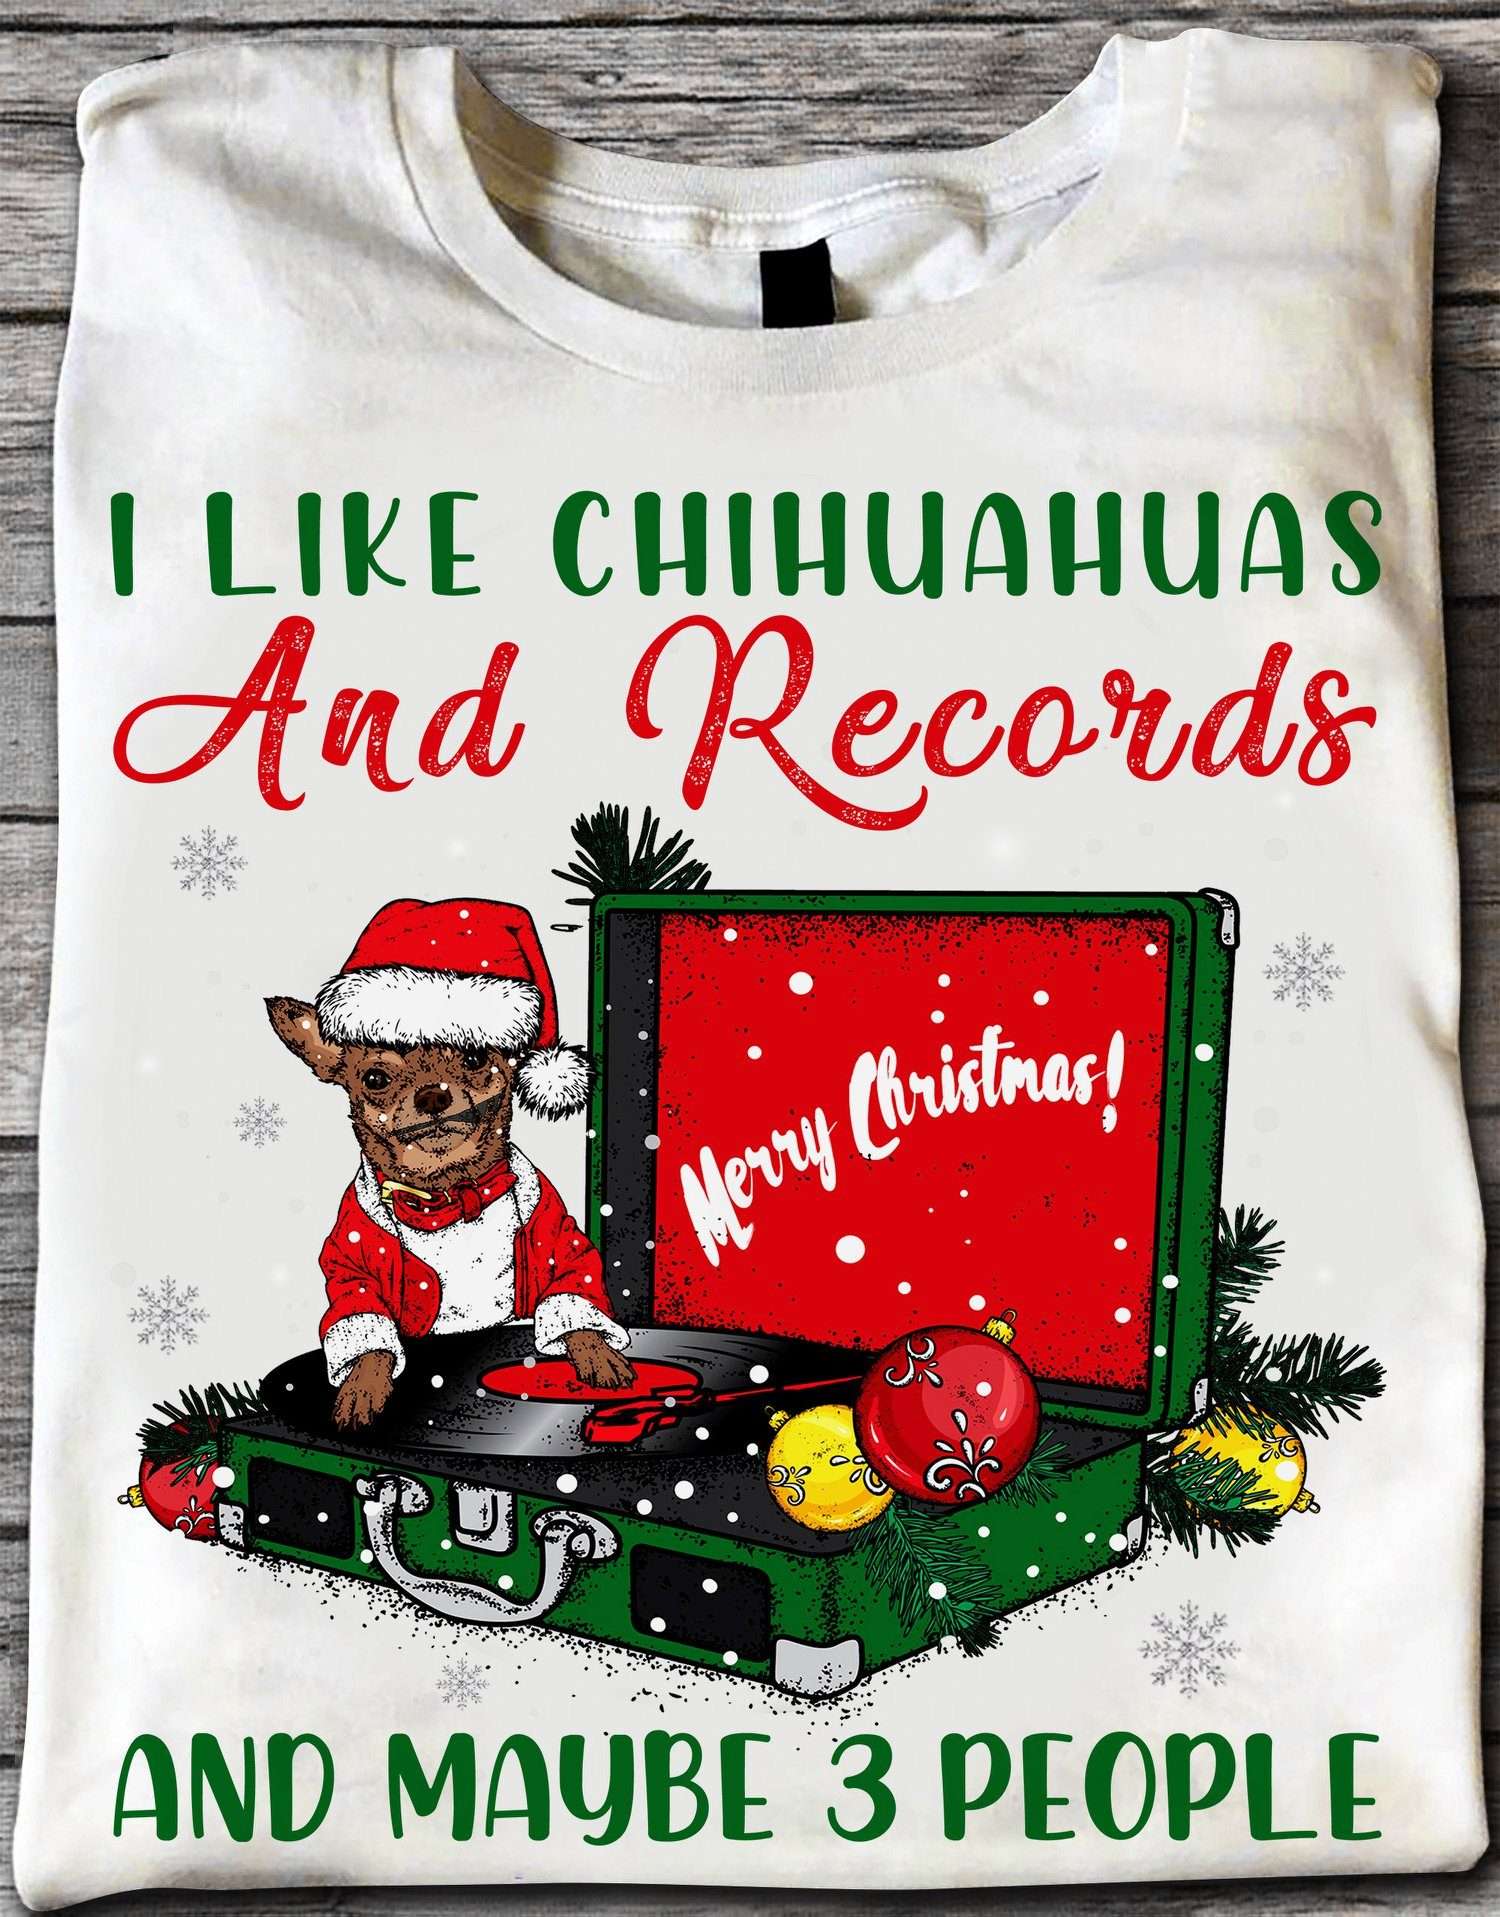 I like Chihuahuas and records and maybe 3 people - Chihuahua the DJ, gift for Chritsmas